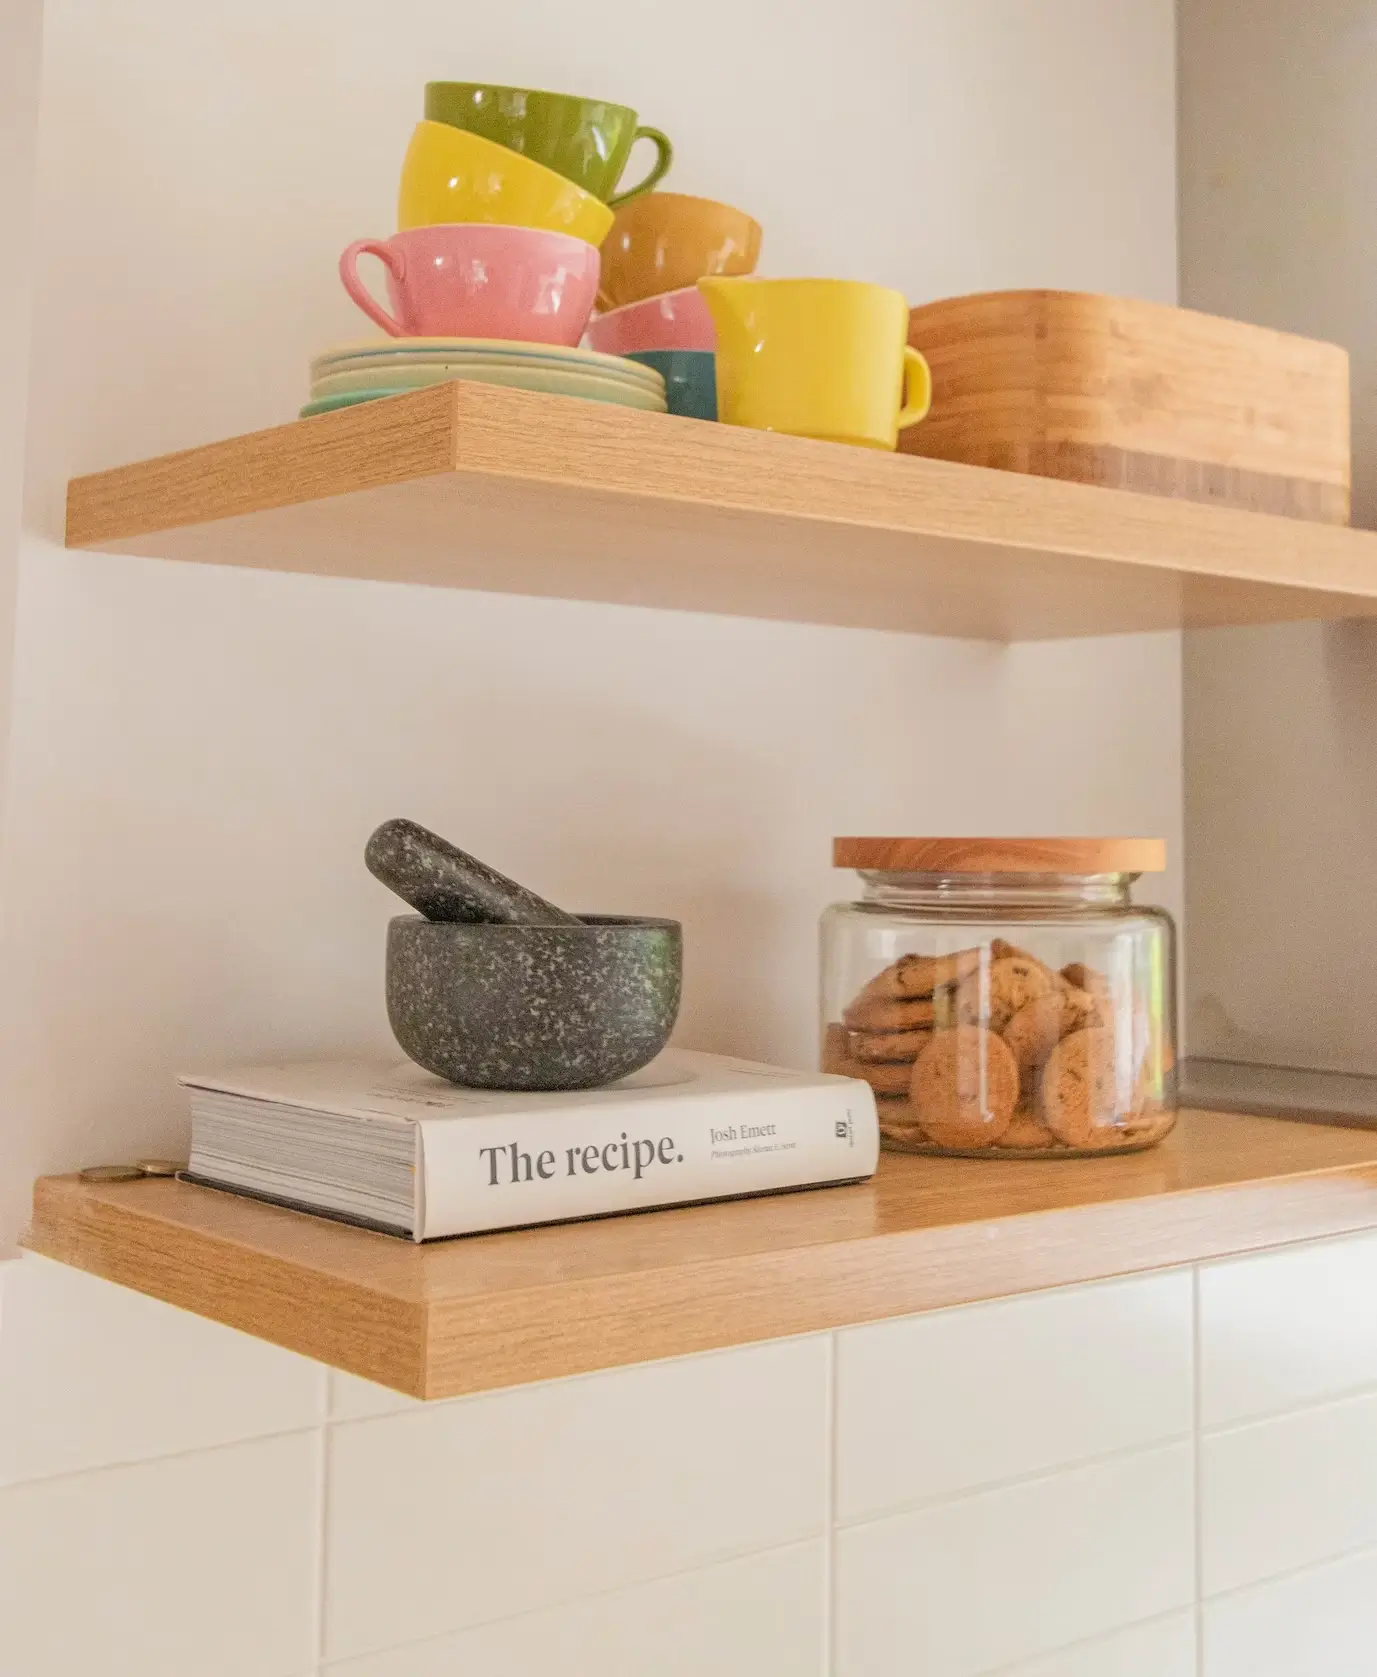 Two wooden shelves are on a white wall. The top shelf has colorful cups and saucers set on it, as well as a wooden box. The lower shelf has a recipe book, a mortar and pestle, and a jar of cookies on it.